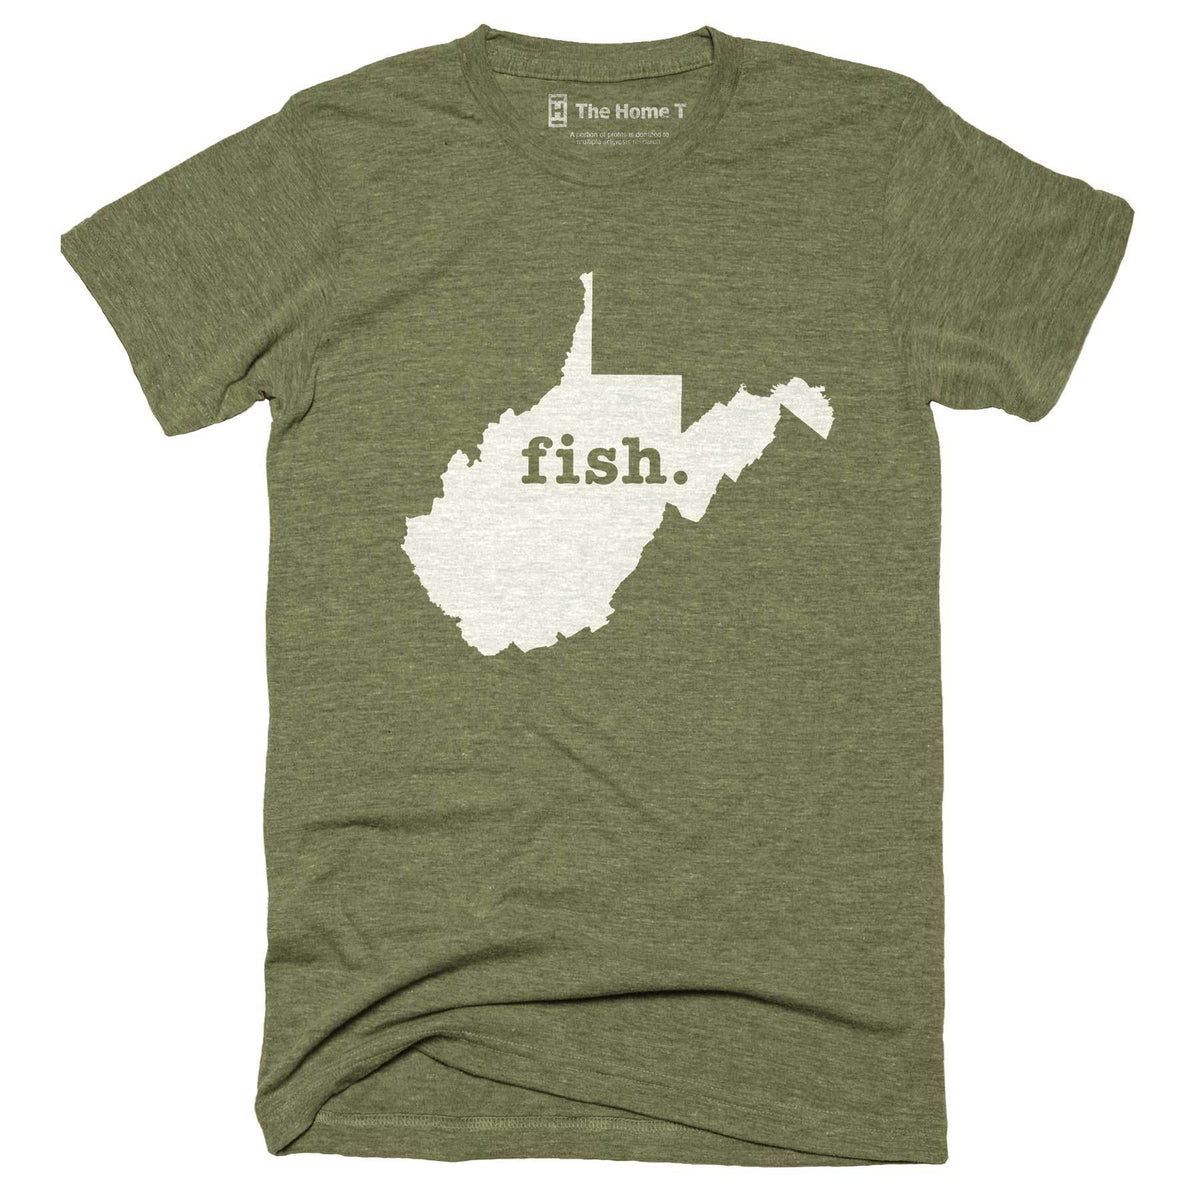 West Virginia Fish Home T-Shirt Outdoor Collection The Home T XXL Army Green